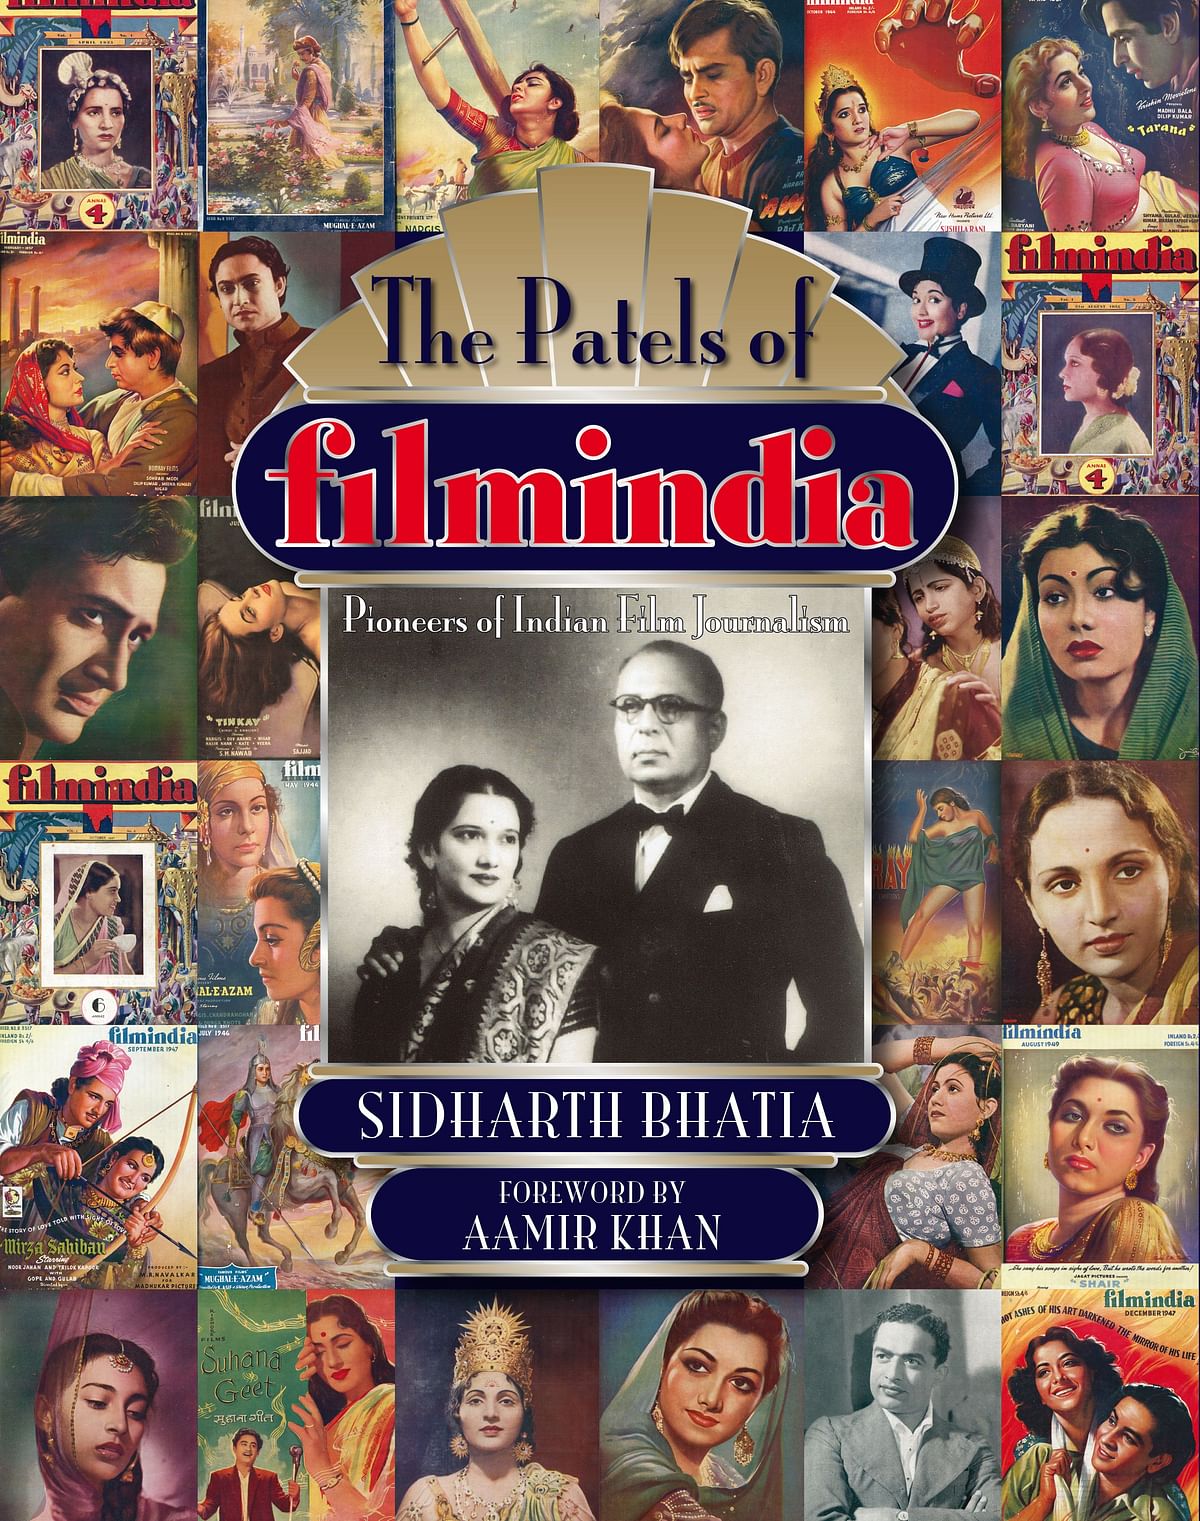 Sidharth Bhatia’s book ‘The Patels of Filmindia’ is an insightful & invaluable record of the history of Indian cinema